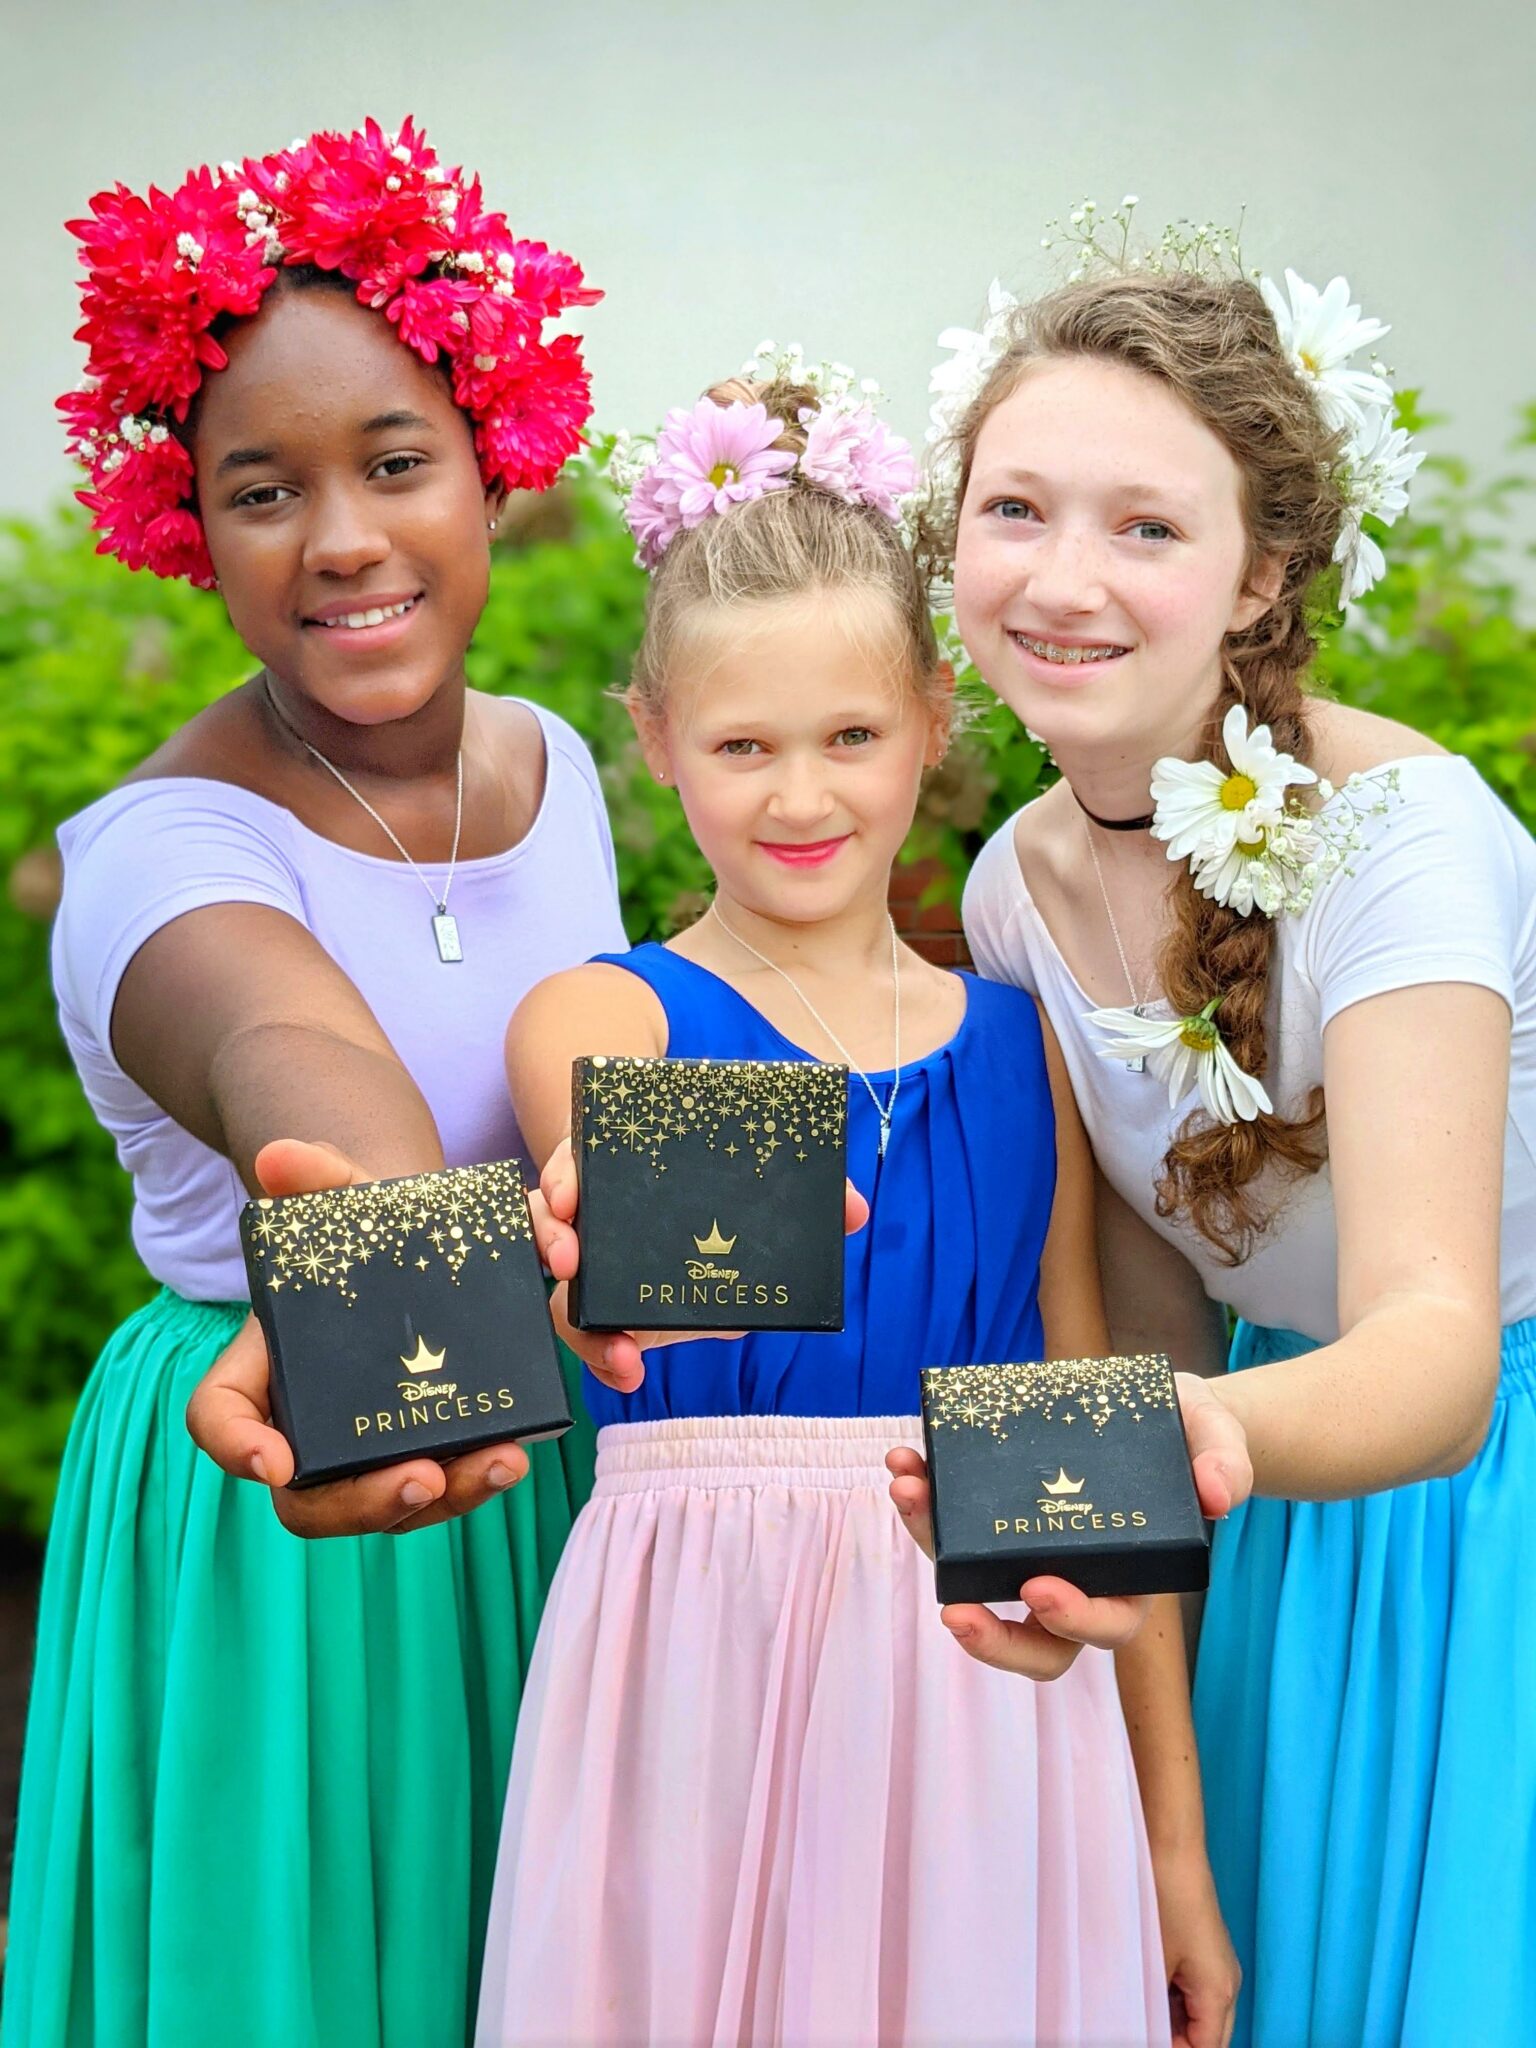 Our Favorite Items from the ShopDisney Ultimate Princess Celebration for Tweens and Teens All Things with Purpose Sarah Lemp 9